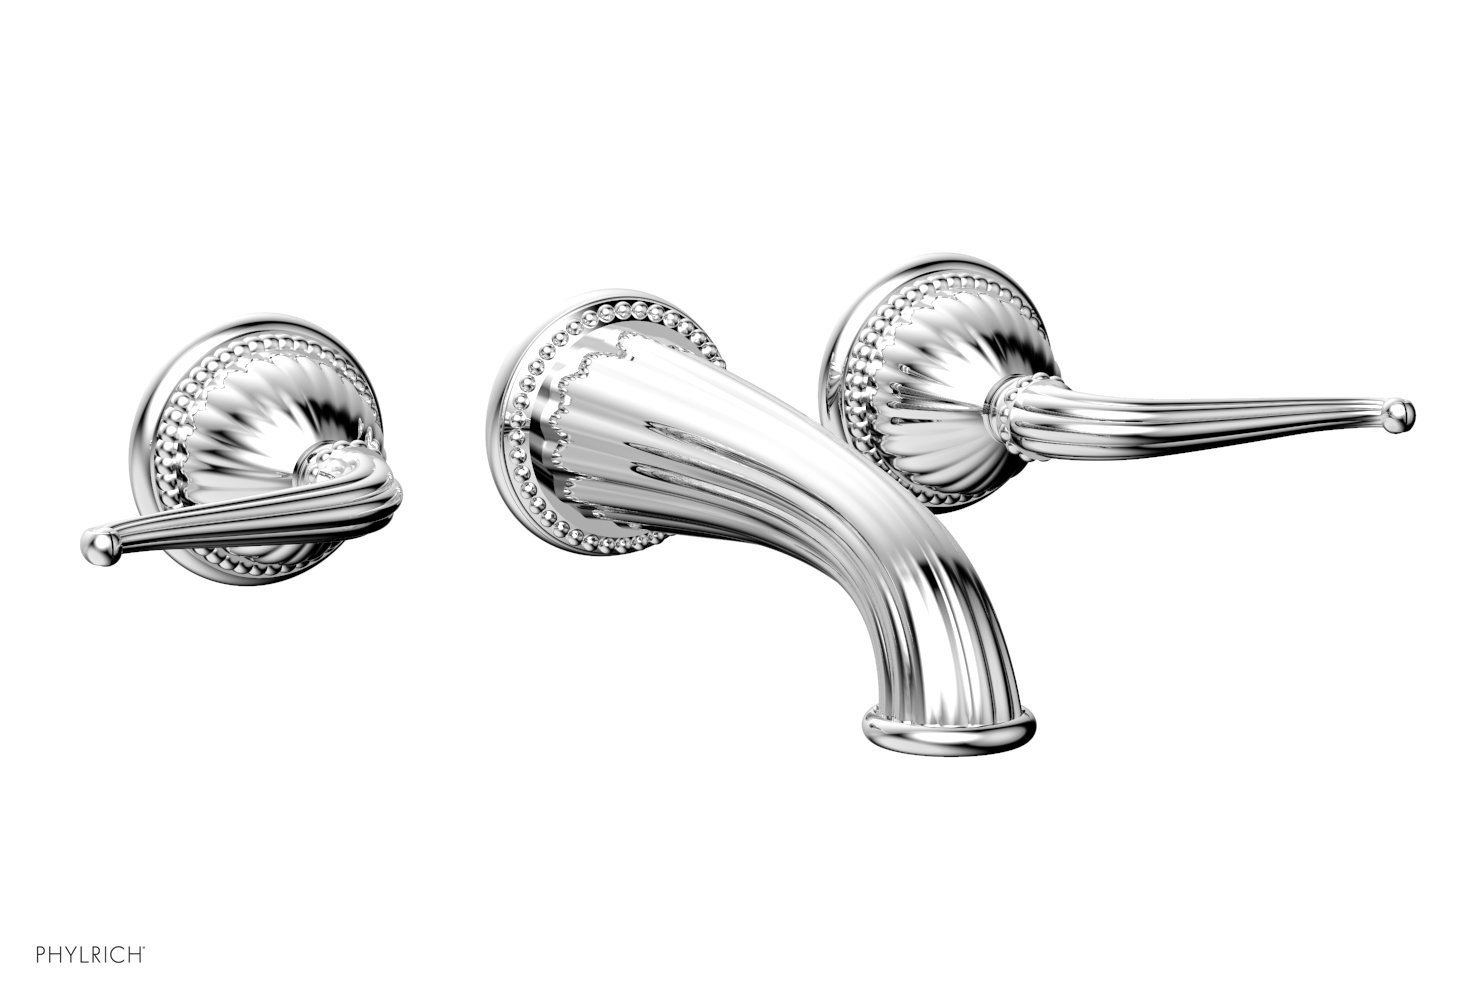 PHYLRICH K1141 GEORGIAN & BARCELONA THREE HOLES WIDESPREAD WALL TUB SET WITH LEVER HANDLES